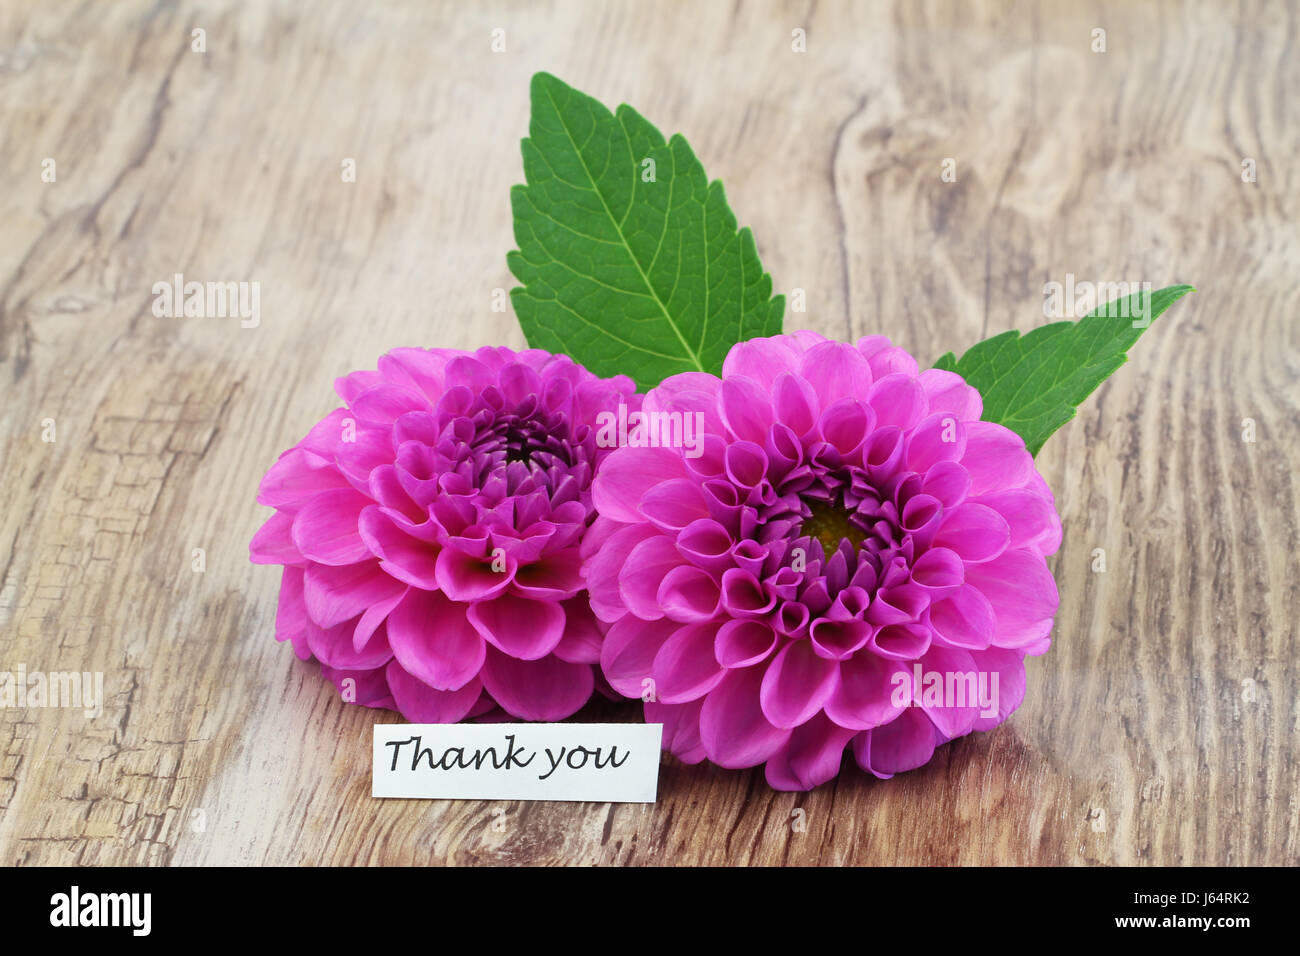 Thank you card with two pink dahlia flowers on wooden surface Stock Photo